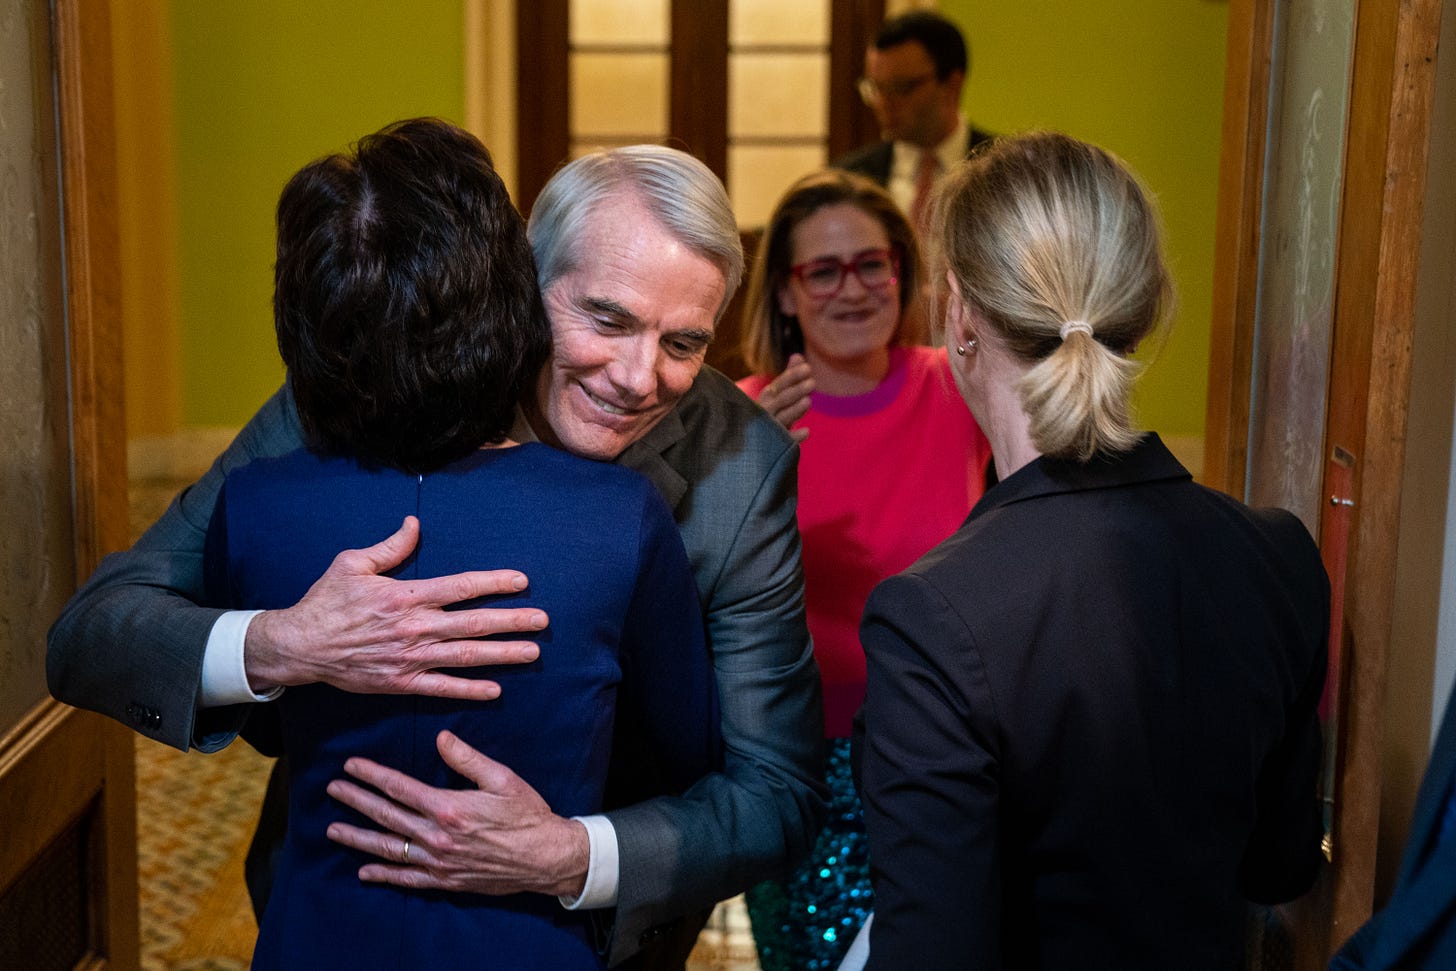 Sen. Rob Portman (R-OH) hugs Sen. Susan Collins (R-ME) as Sen. Kyrsten Sinema (D-AZ) moves to hug Sen. Tammy Baldwin (D-WI) following a news conference on the passage of the bipartisan Respect For Marriage Act through the Senate following a vote on Capitol Hill on Tuesday, Nov. 29, 2022 in Washington, DC. (Kent Nishimura / Los Angeles Times via Getty Images)